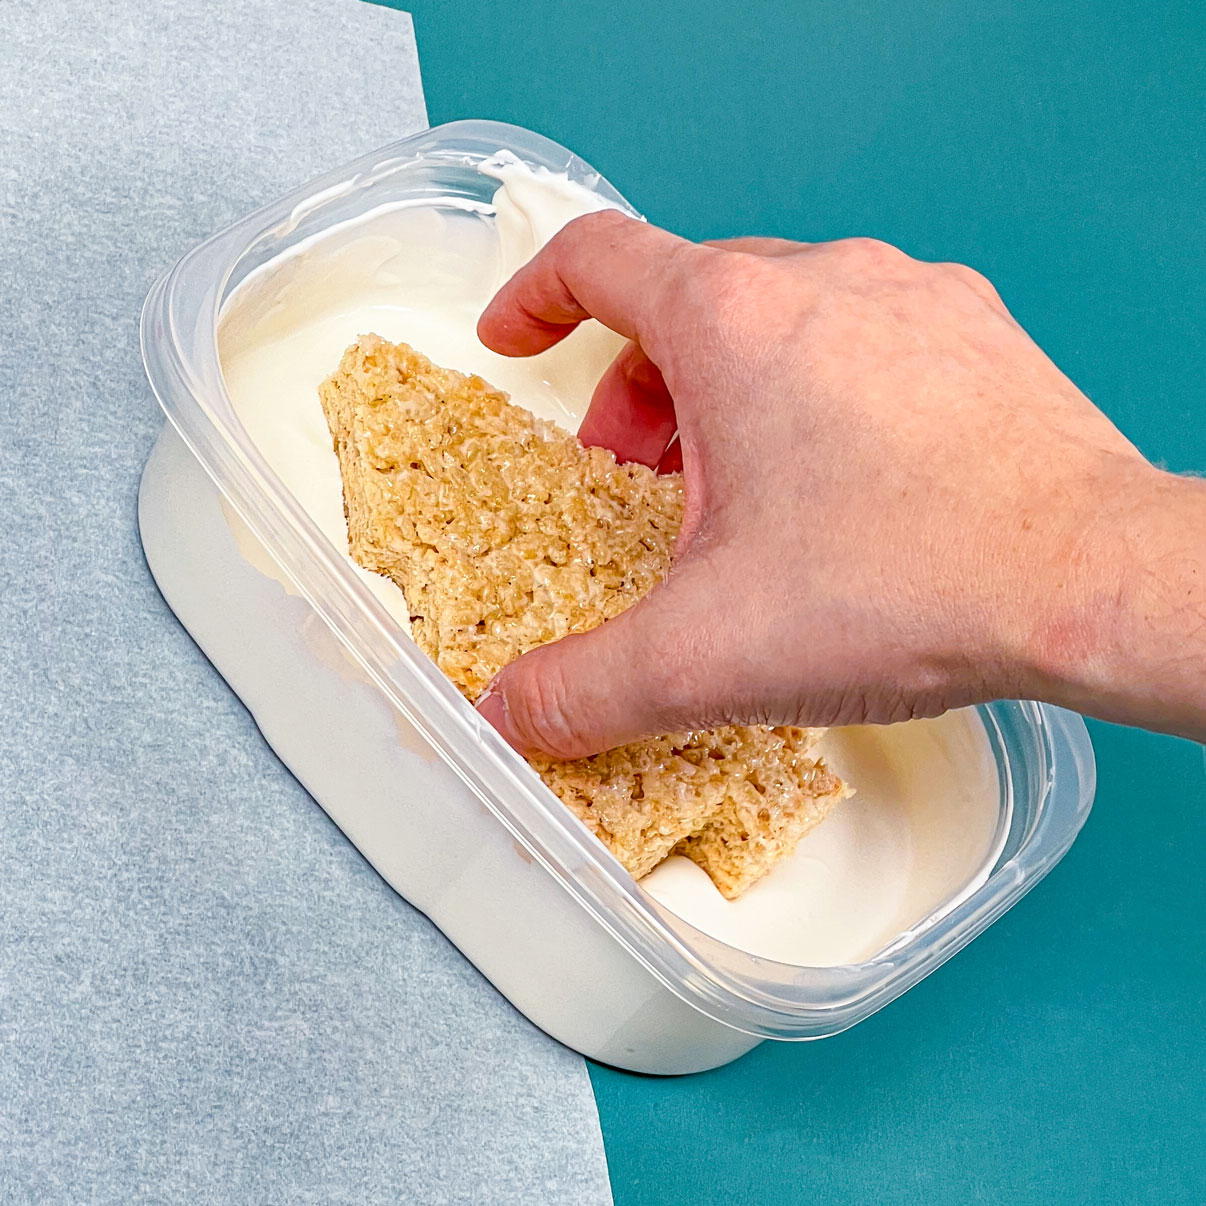 dipping rice krispie treat into melted white chocolate />
</div><div class=